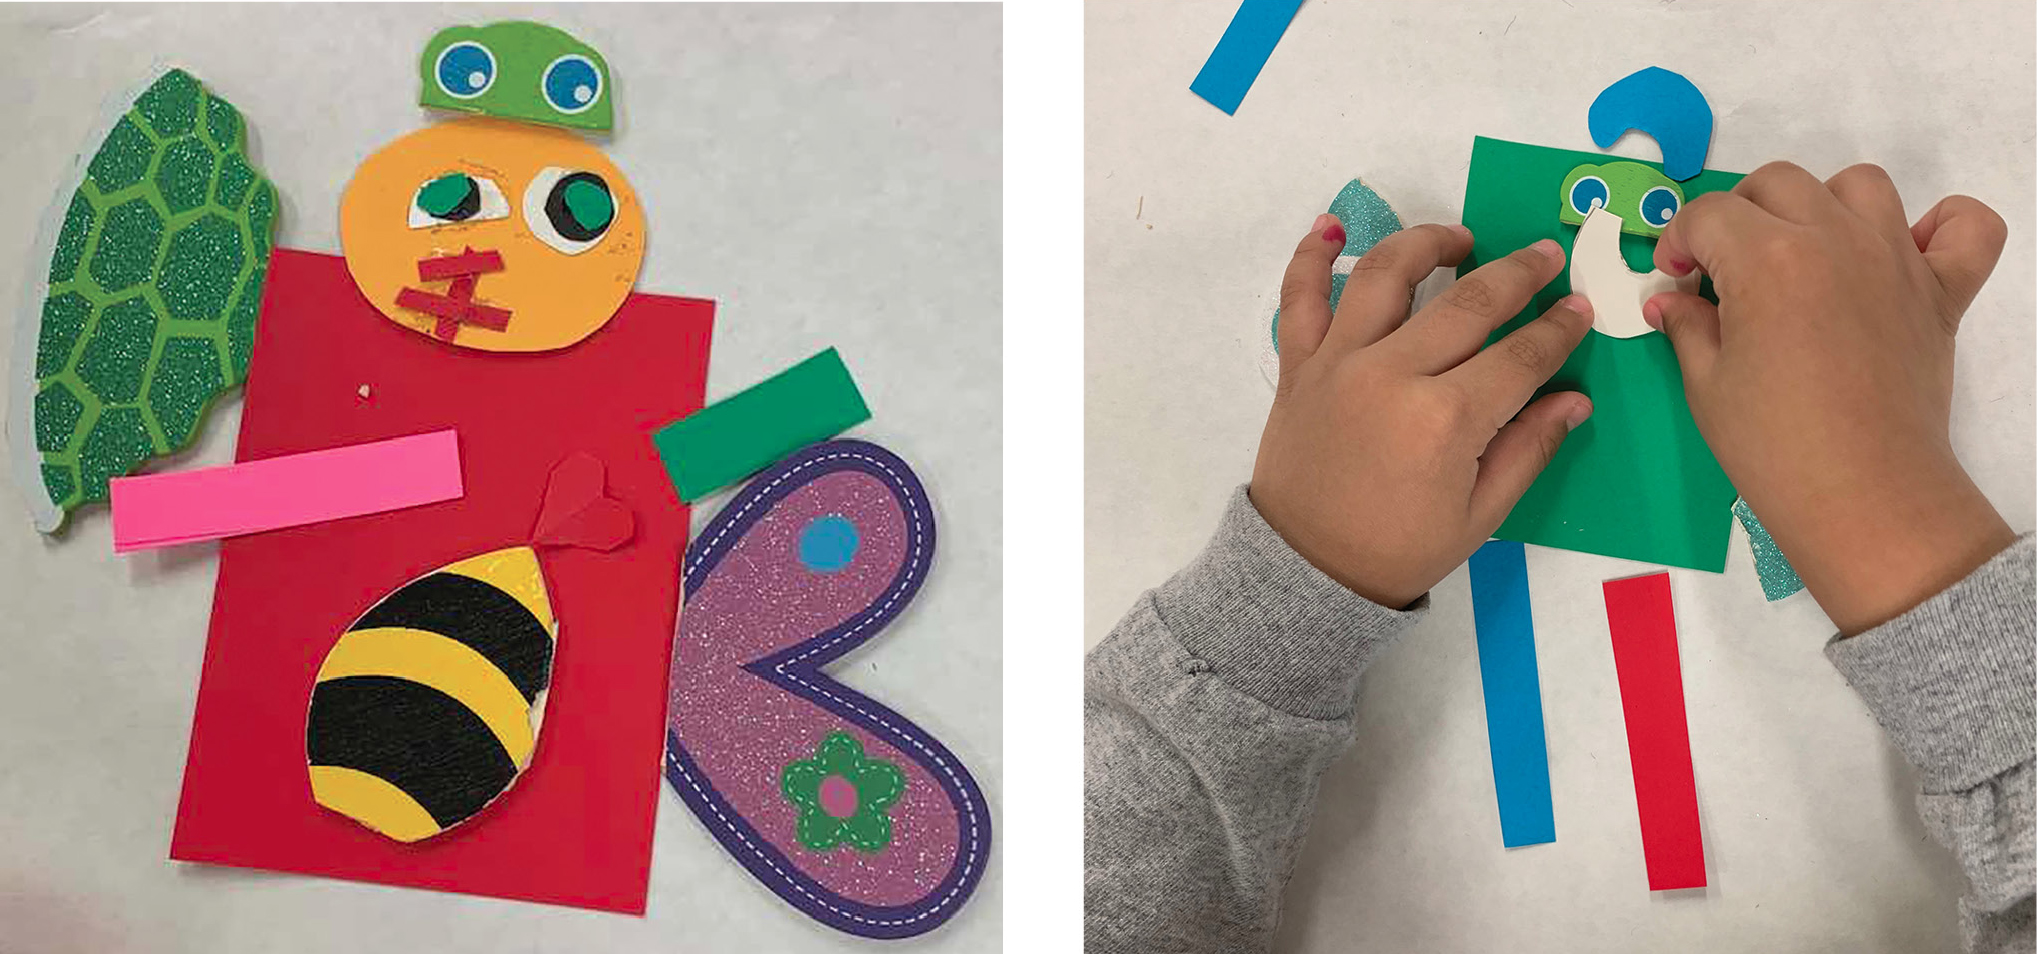 One child assembled a robot with wings so it can fly (left) and another a robot with turtle-eyes and insect-wings (right).